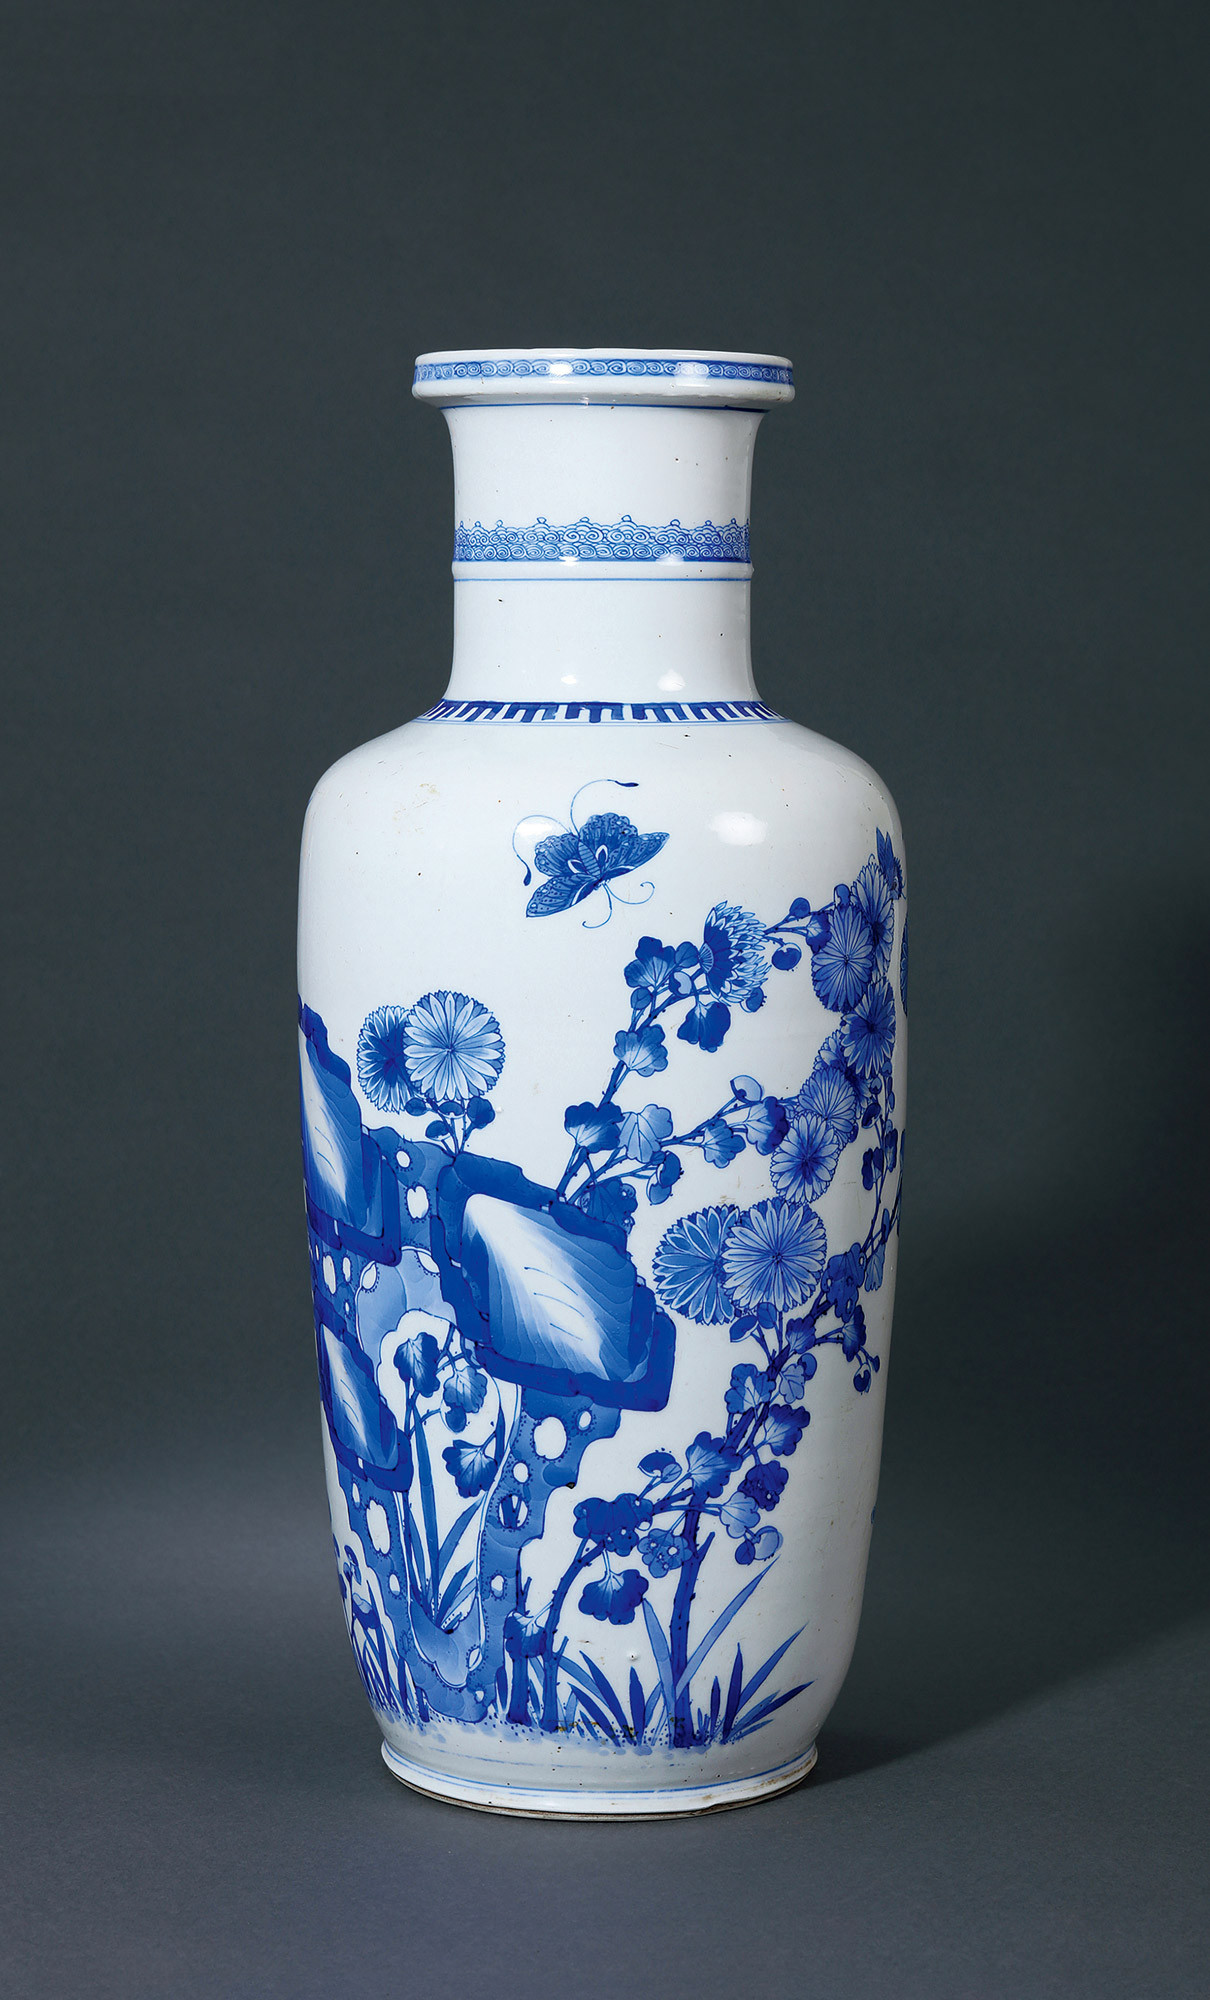 A BLUE AND WHITE VASE WITH FLOWERS DESIGN